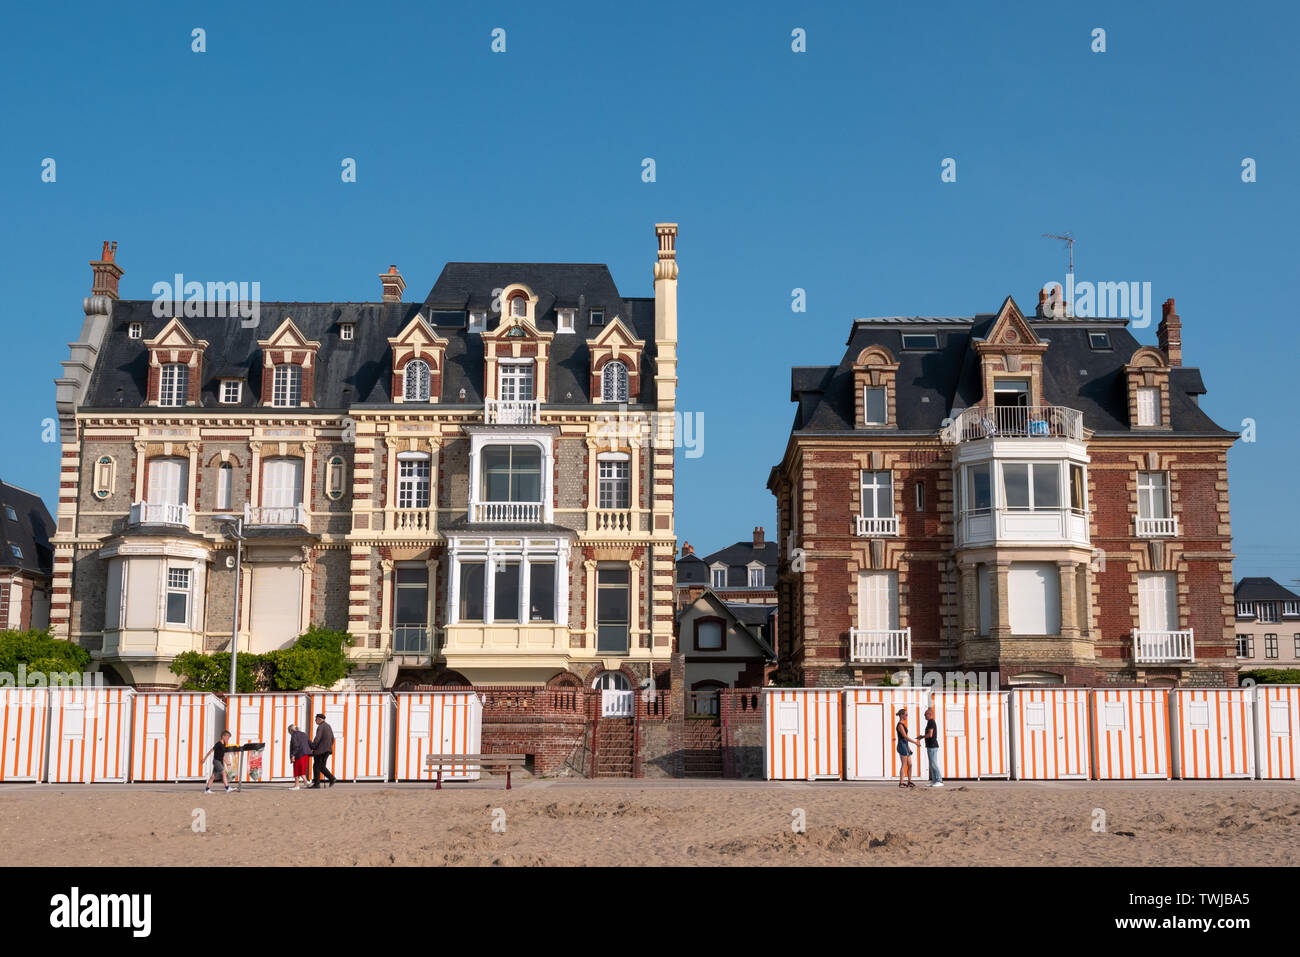 Houlgate, France - June 4, 2019: Typical houses and beach cabins of Houlgate. Stock Photo